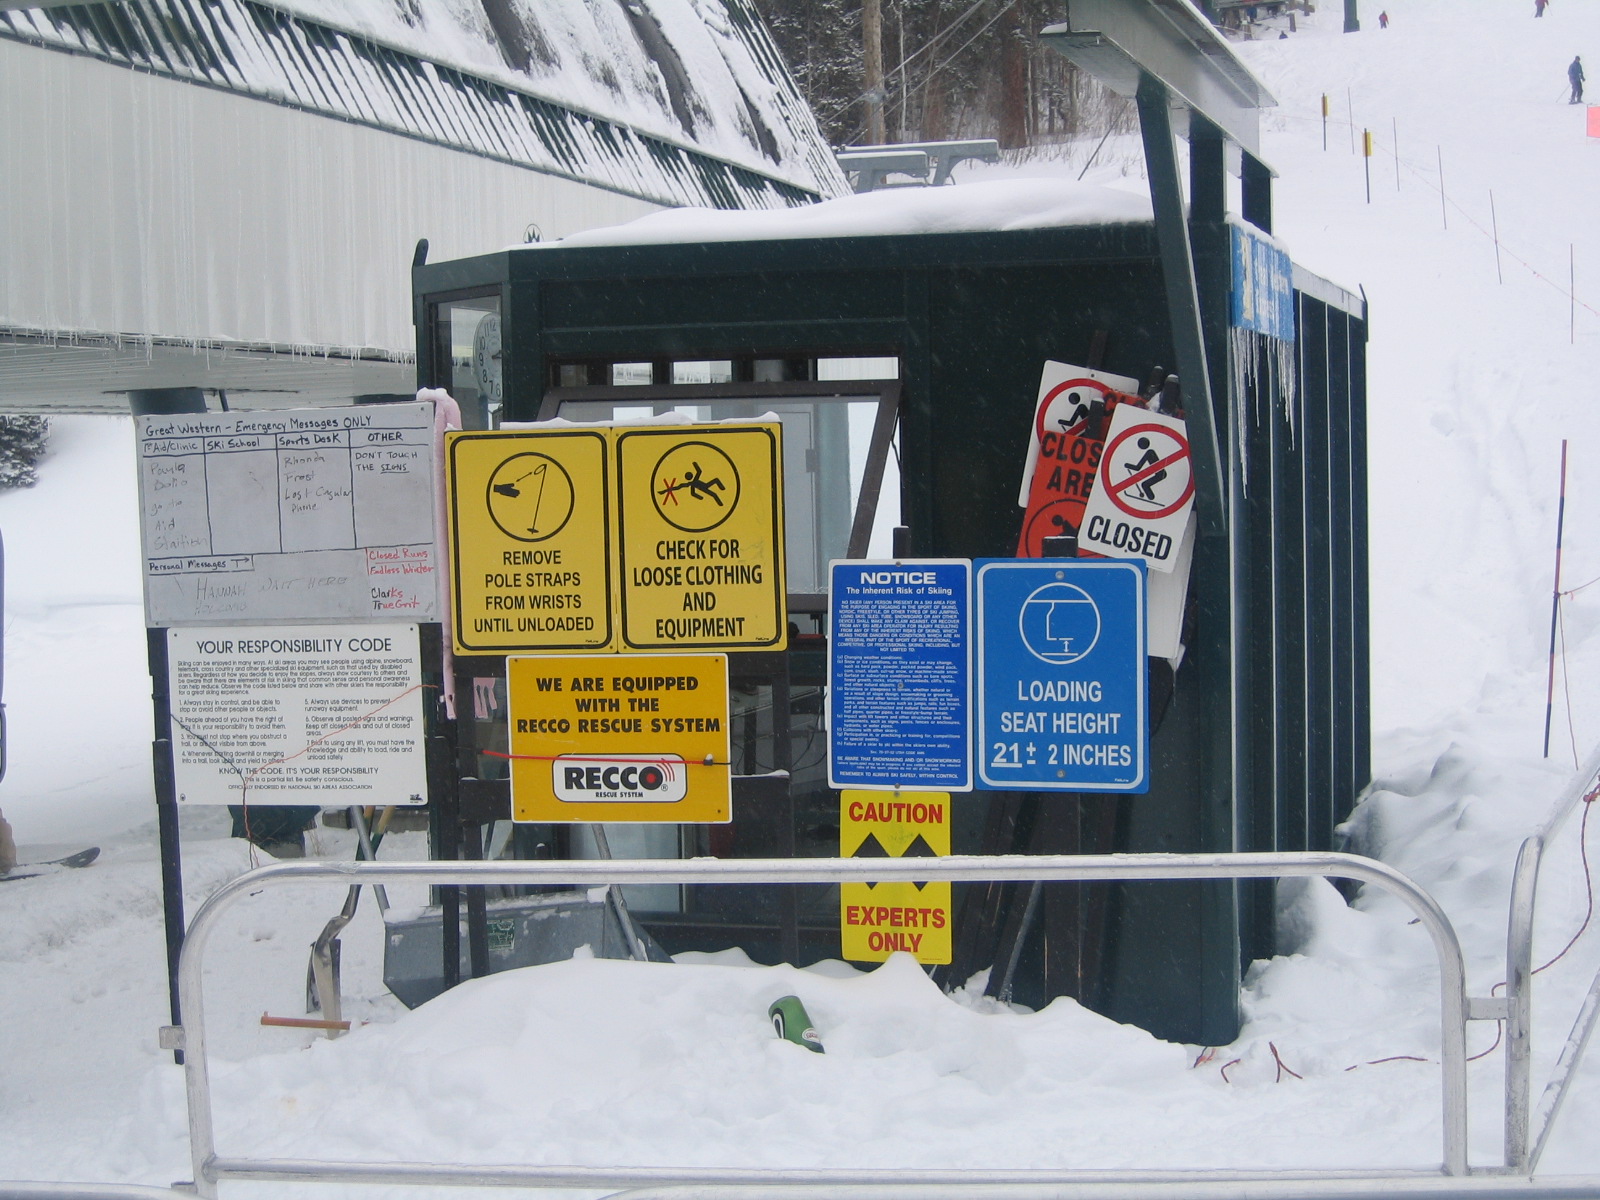 Numerous Information Signs for Ski Lift